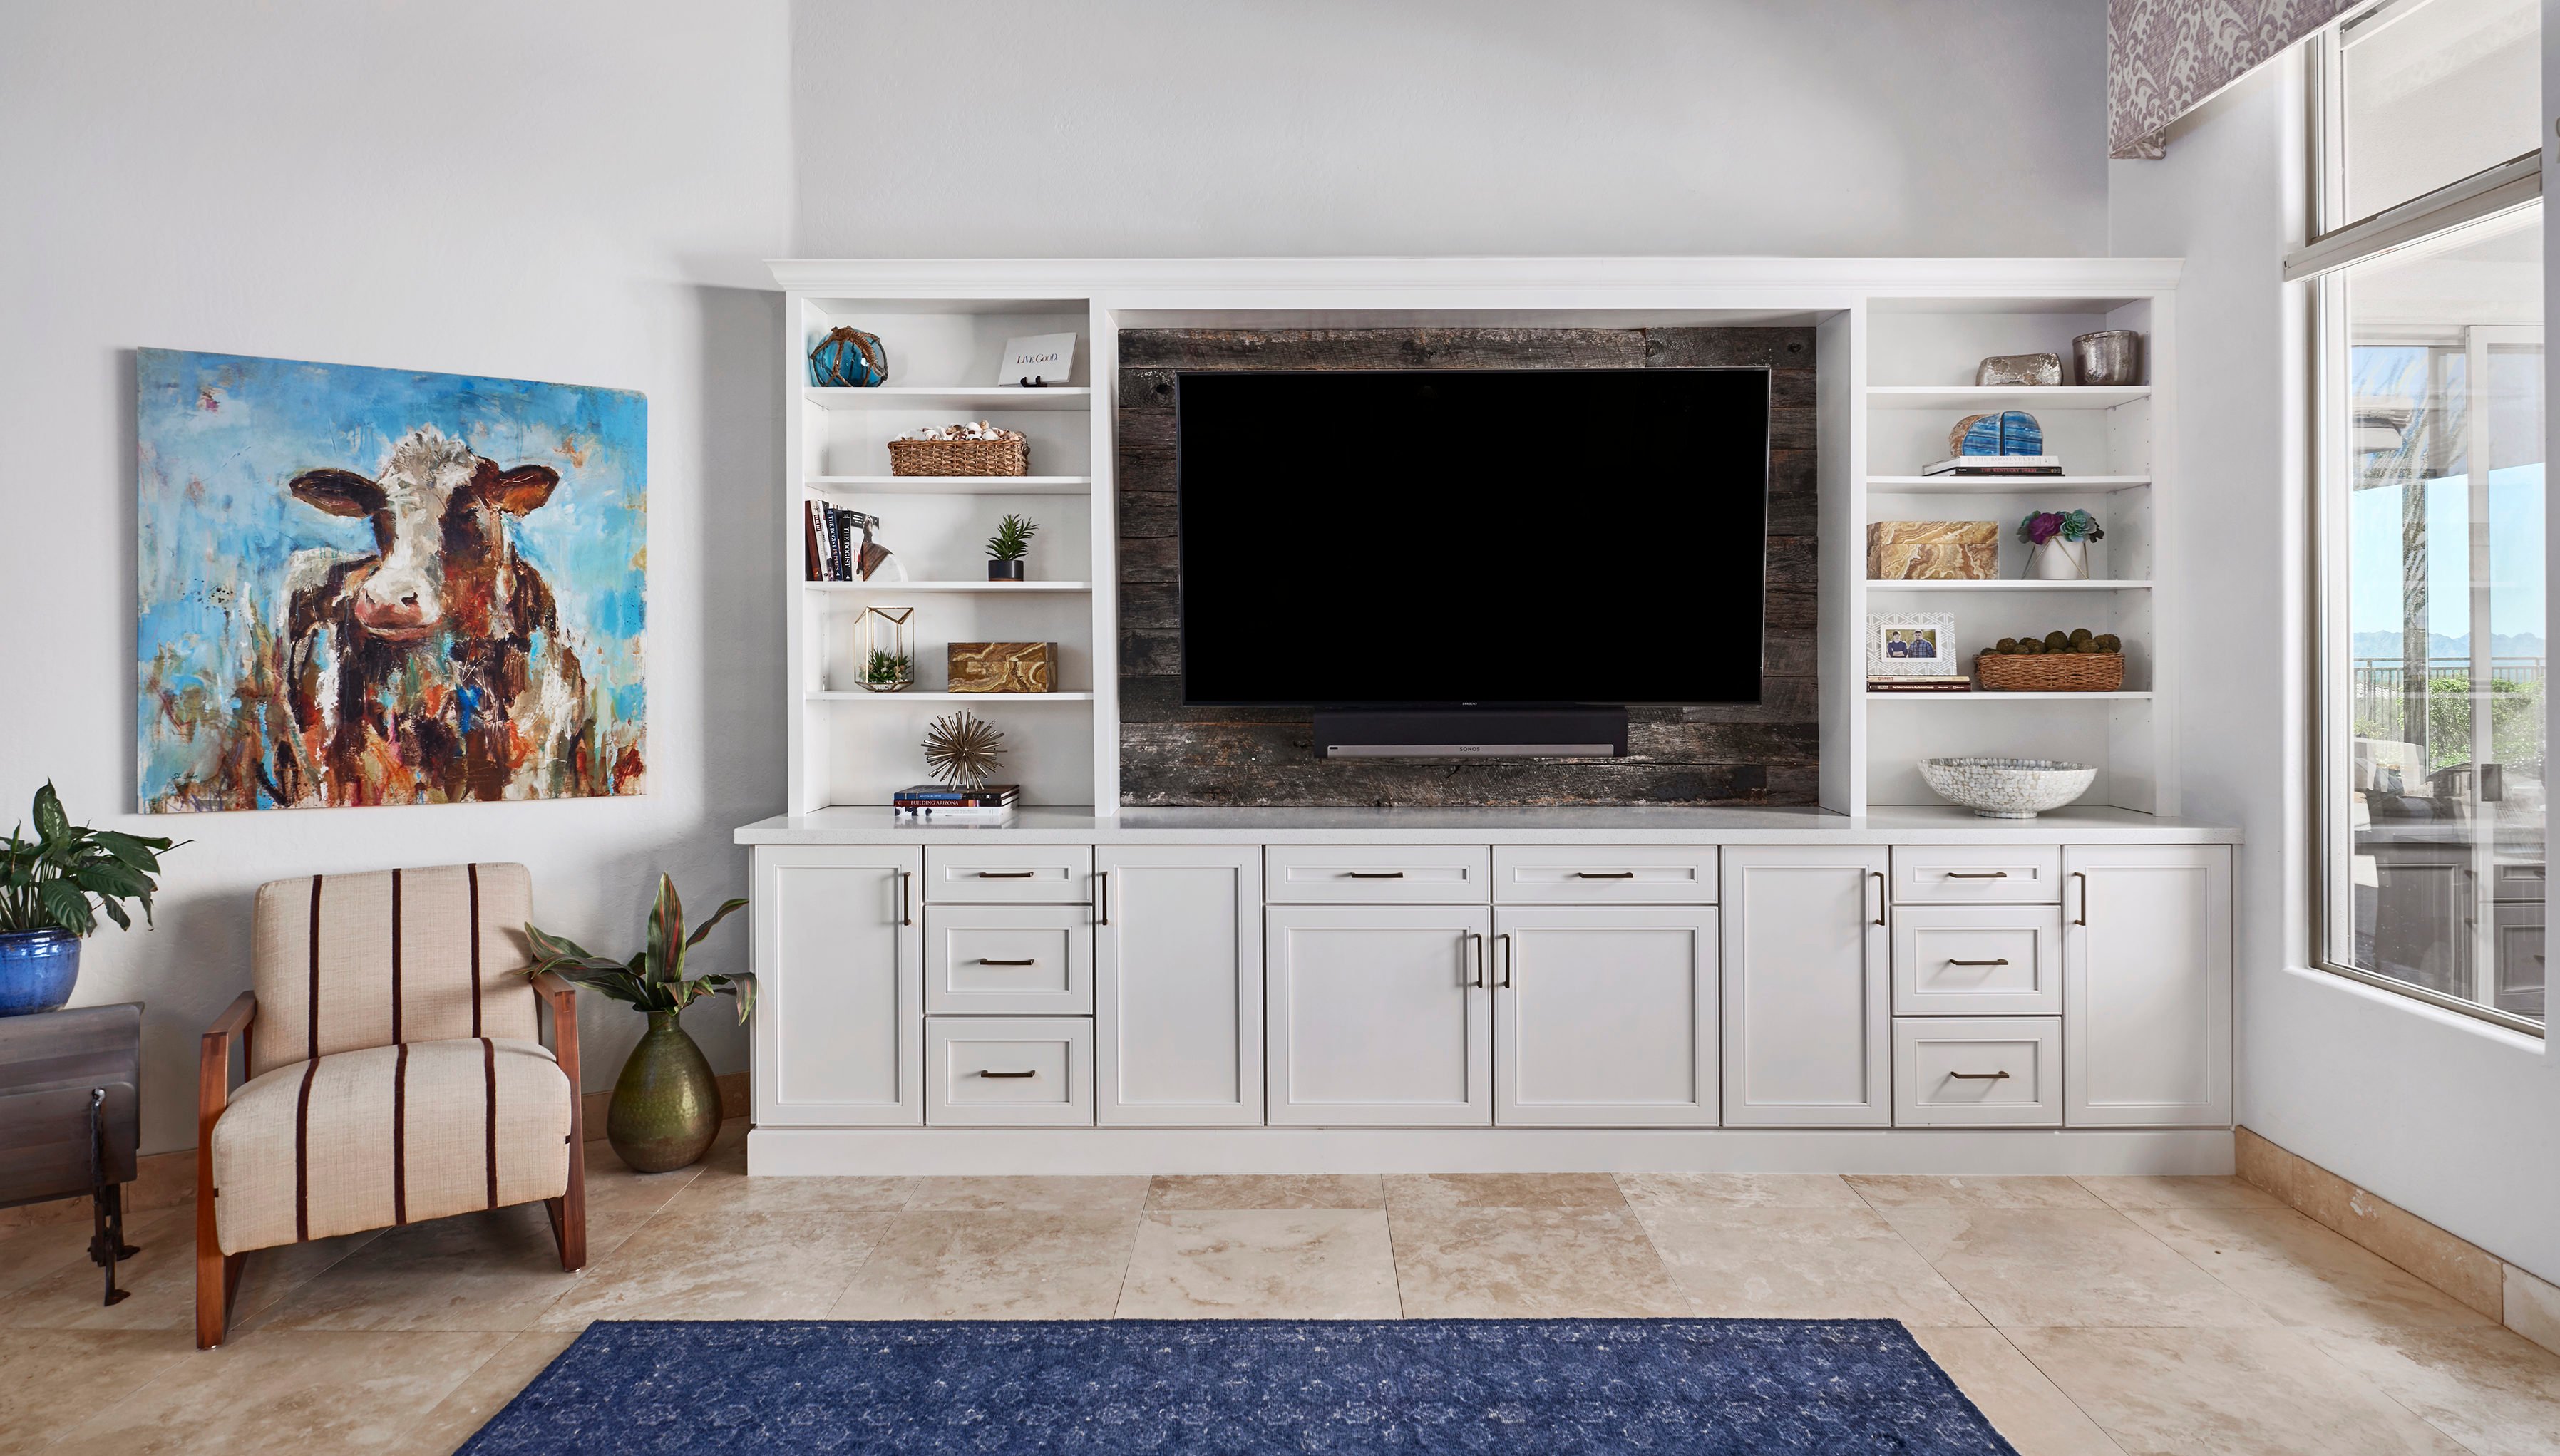 TV set with white stand and matching hutch